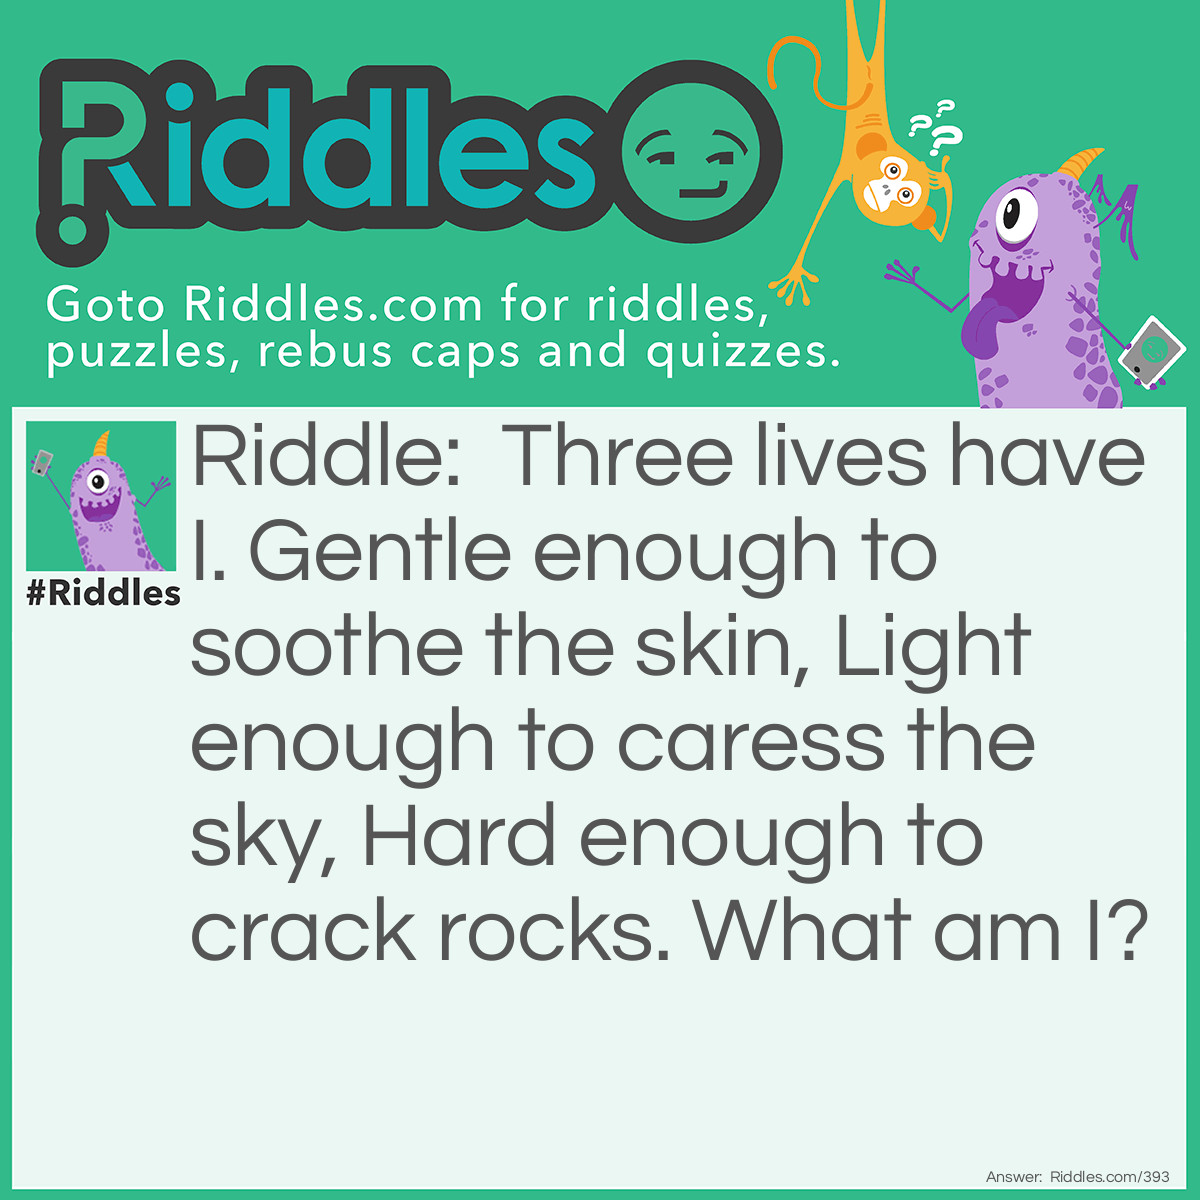 Riddle: Three lives have I. Gentle enough to soothe the skin, Light enough to caress the sky, Hard enough to crack rocks. What am I? Answer: Water. Explanation: Water can be in the form of a liquid, solid (ice) and/or a gas (water vapor) which is represented by "three lives".  As a liquid, it is used to bathe, as a gas it creates clouds that float in the sky, and as a solid (ice), it can split rocks or create glaciers that scour the earth as they move downhill.